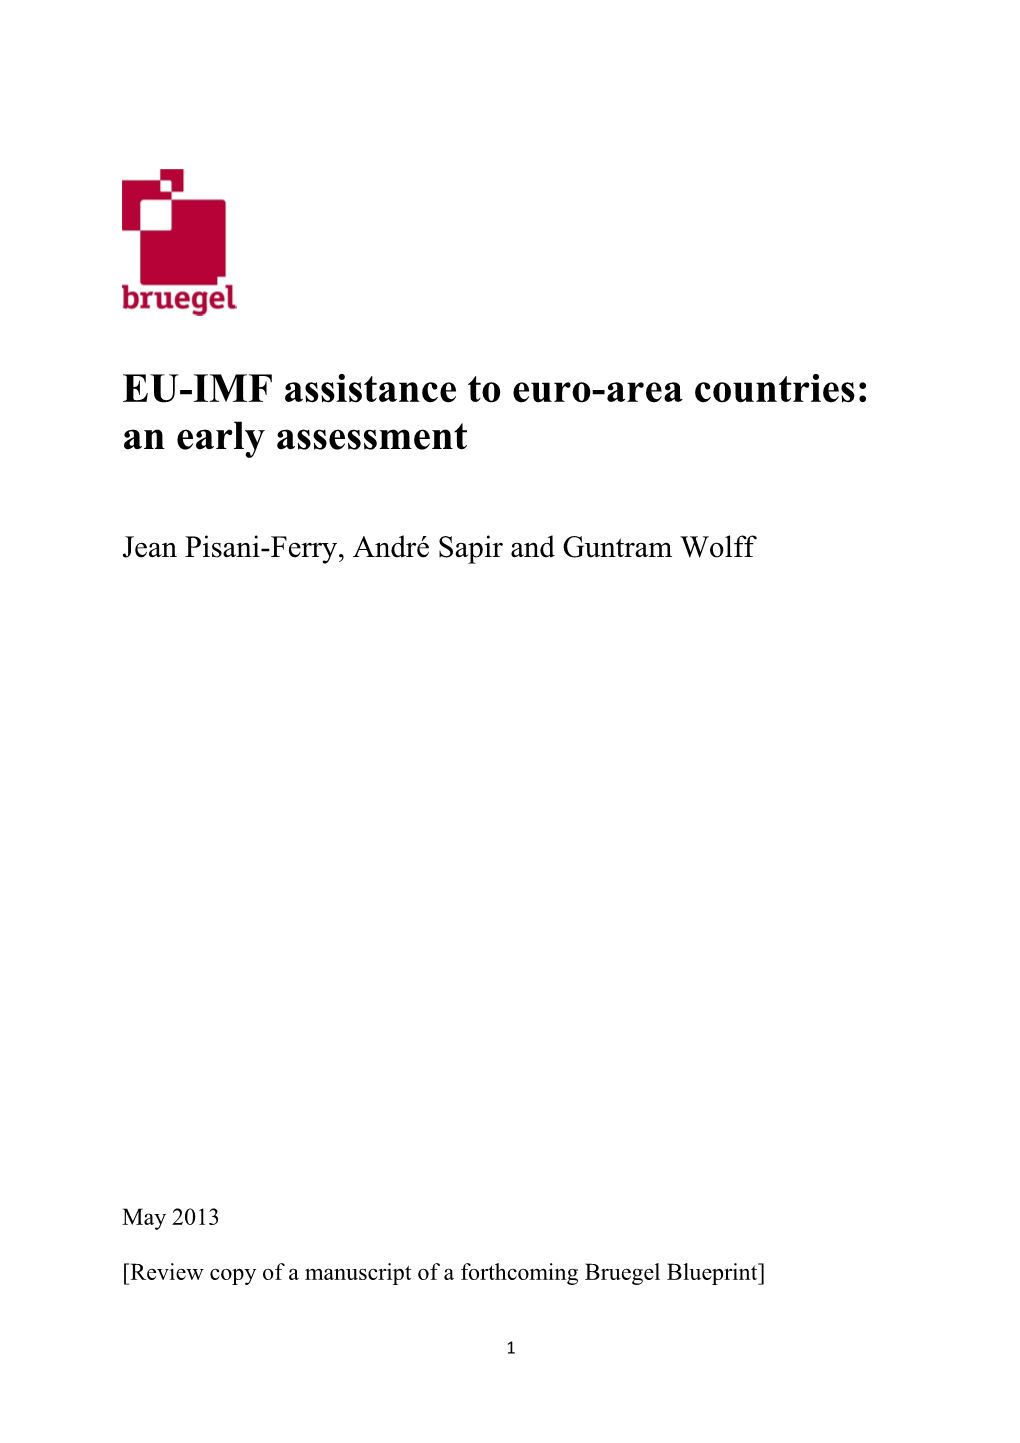 EU-IMF Assistance to Euro-Area Countries: an Early Assessment